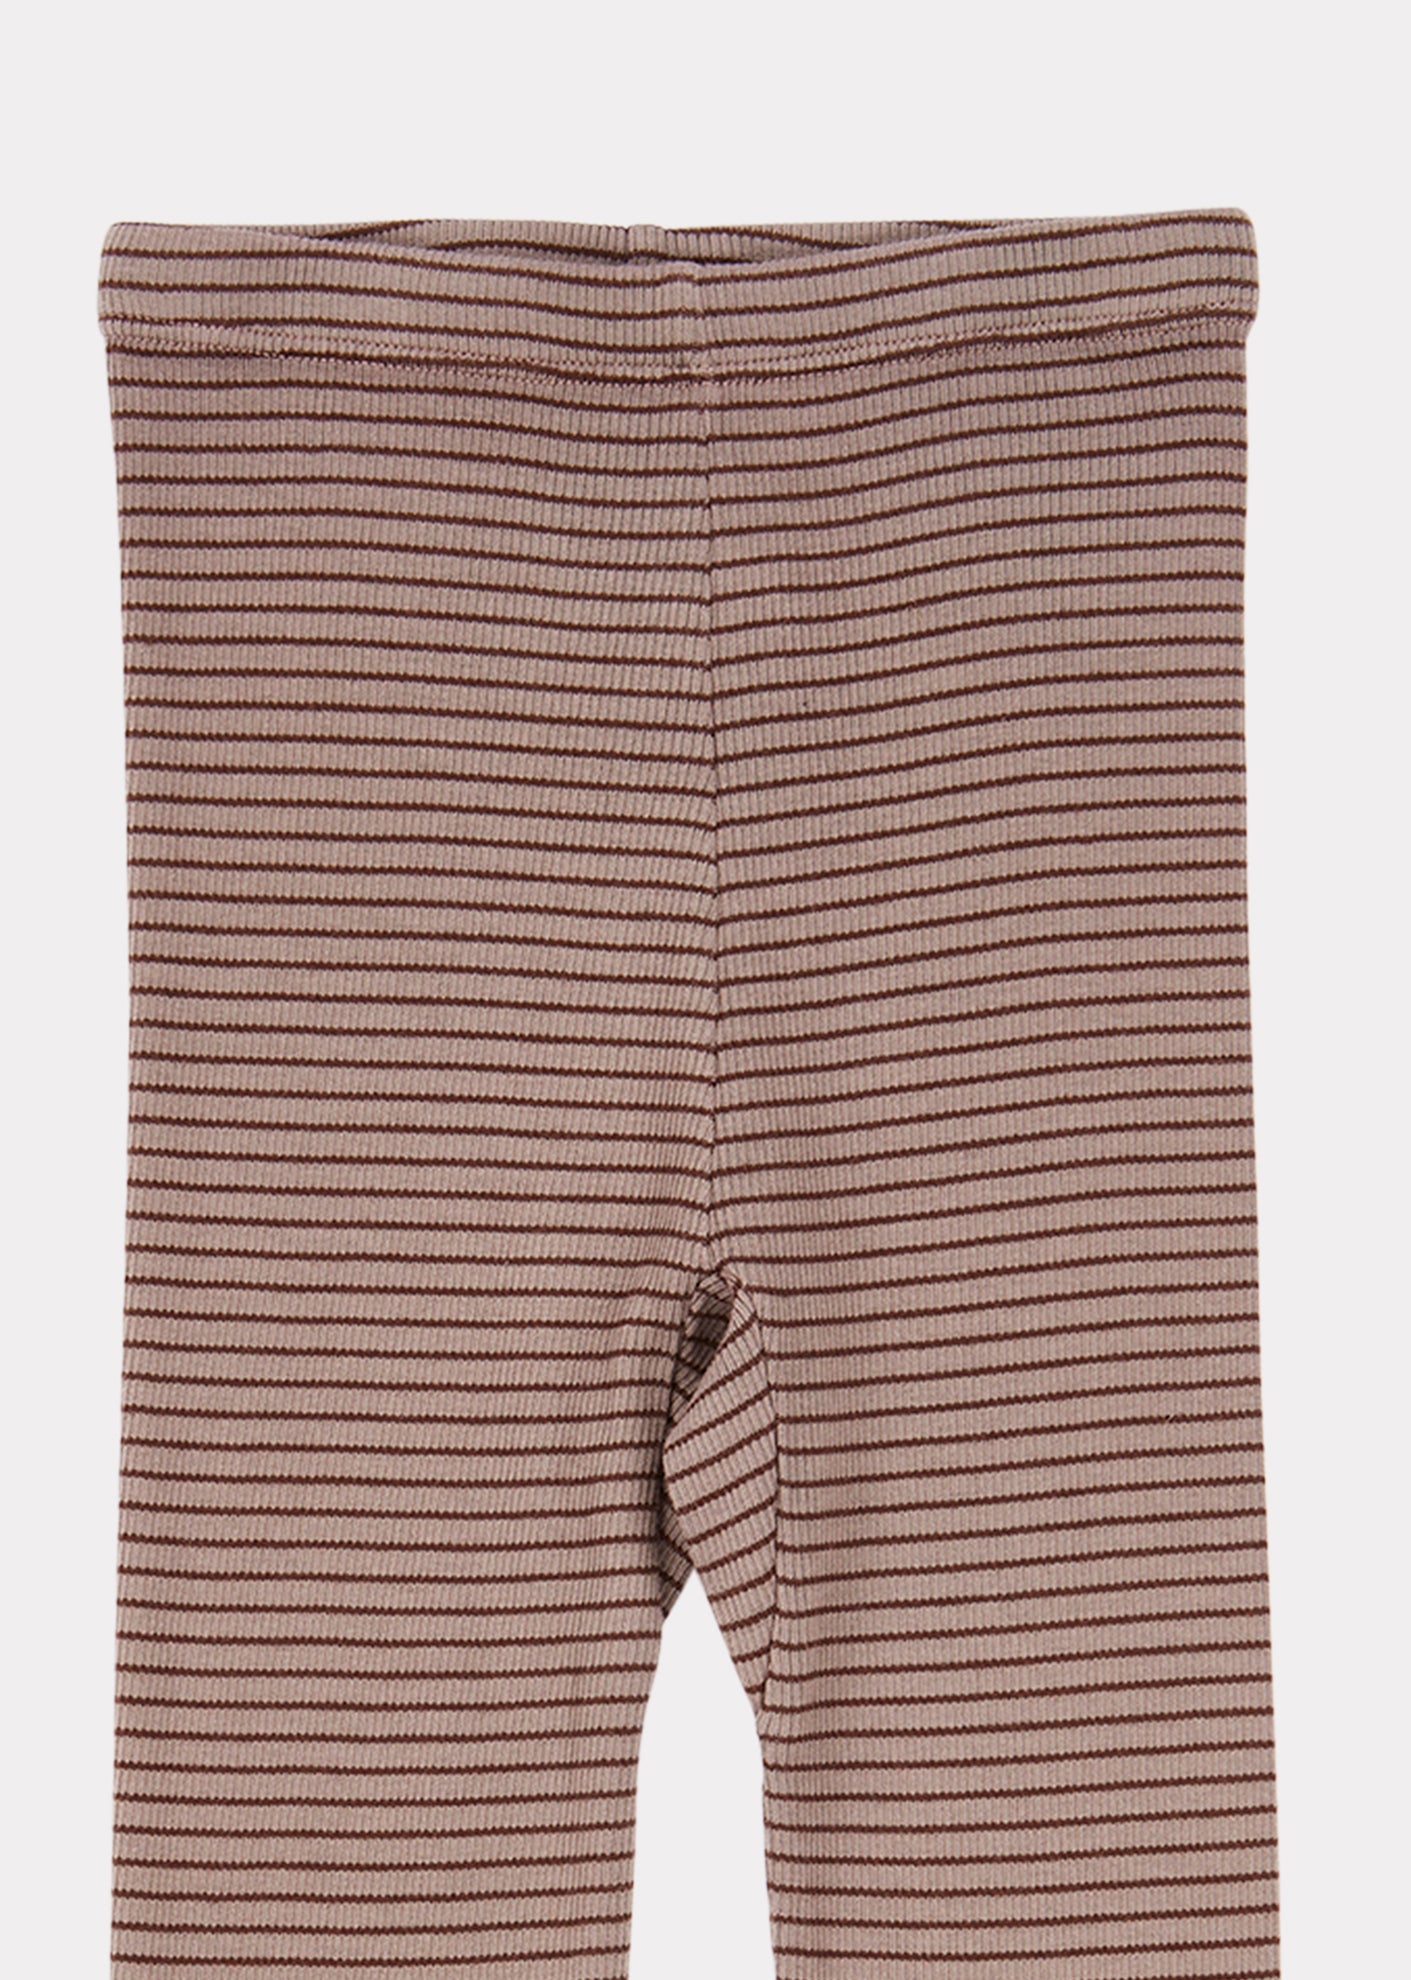 Boys & Girls Storm Chaffinch Trousers